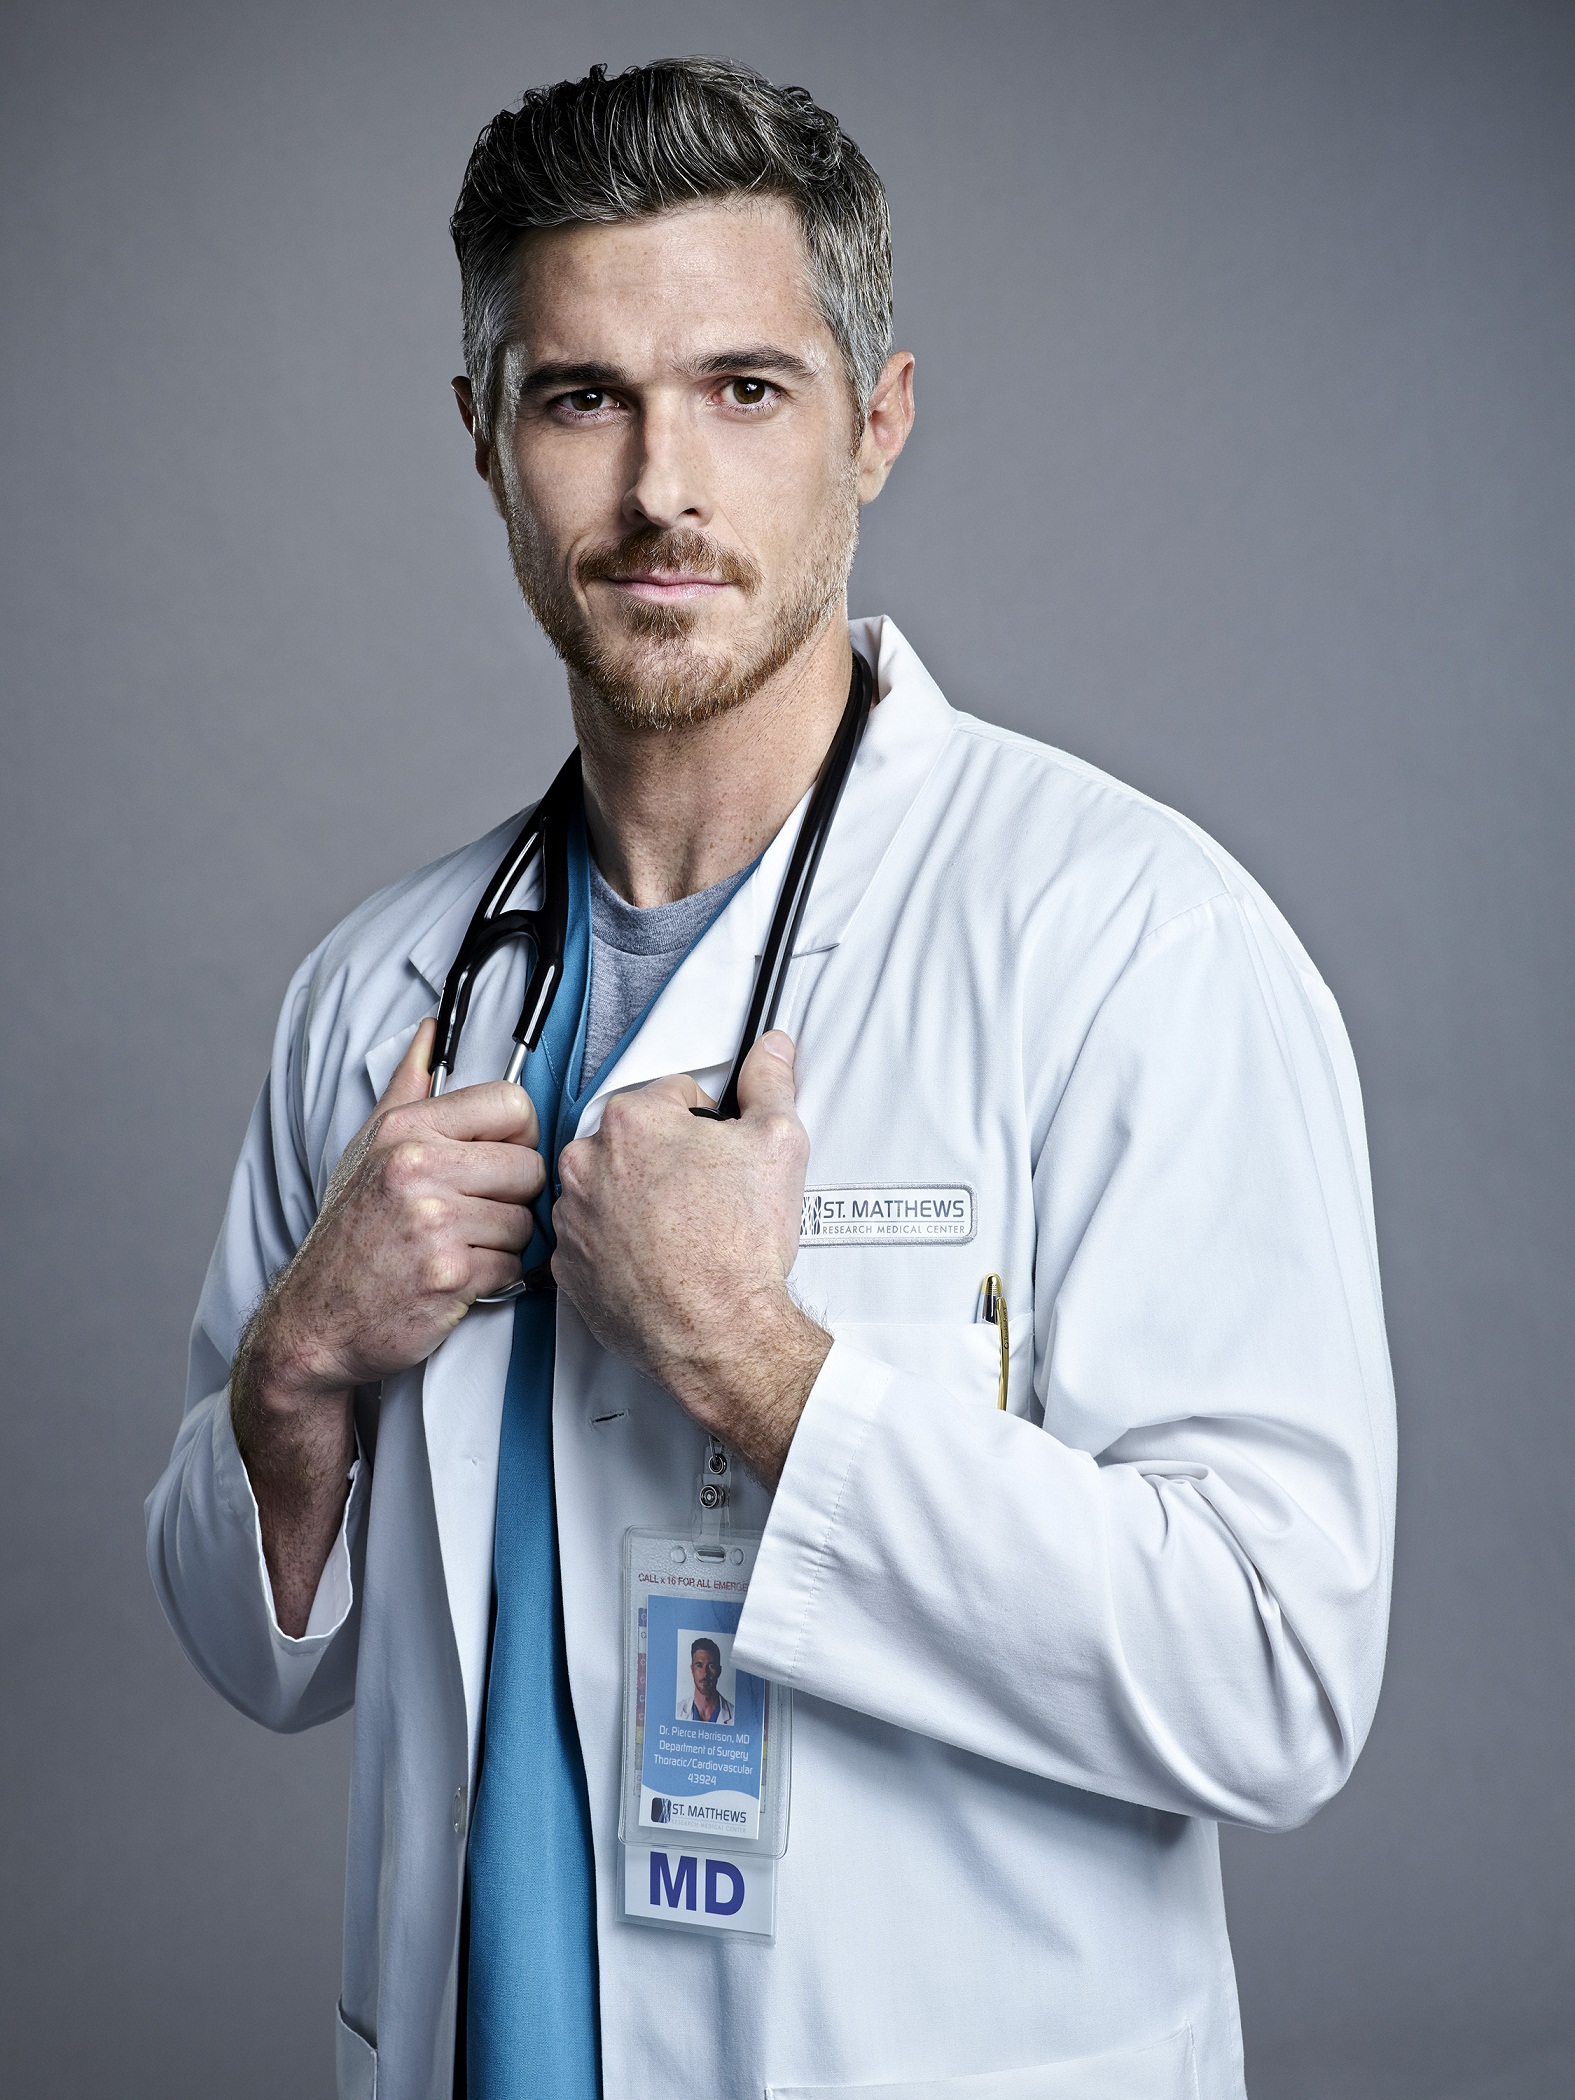 OTE TV Heartbeat series Dave Annable